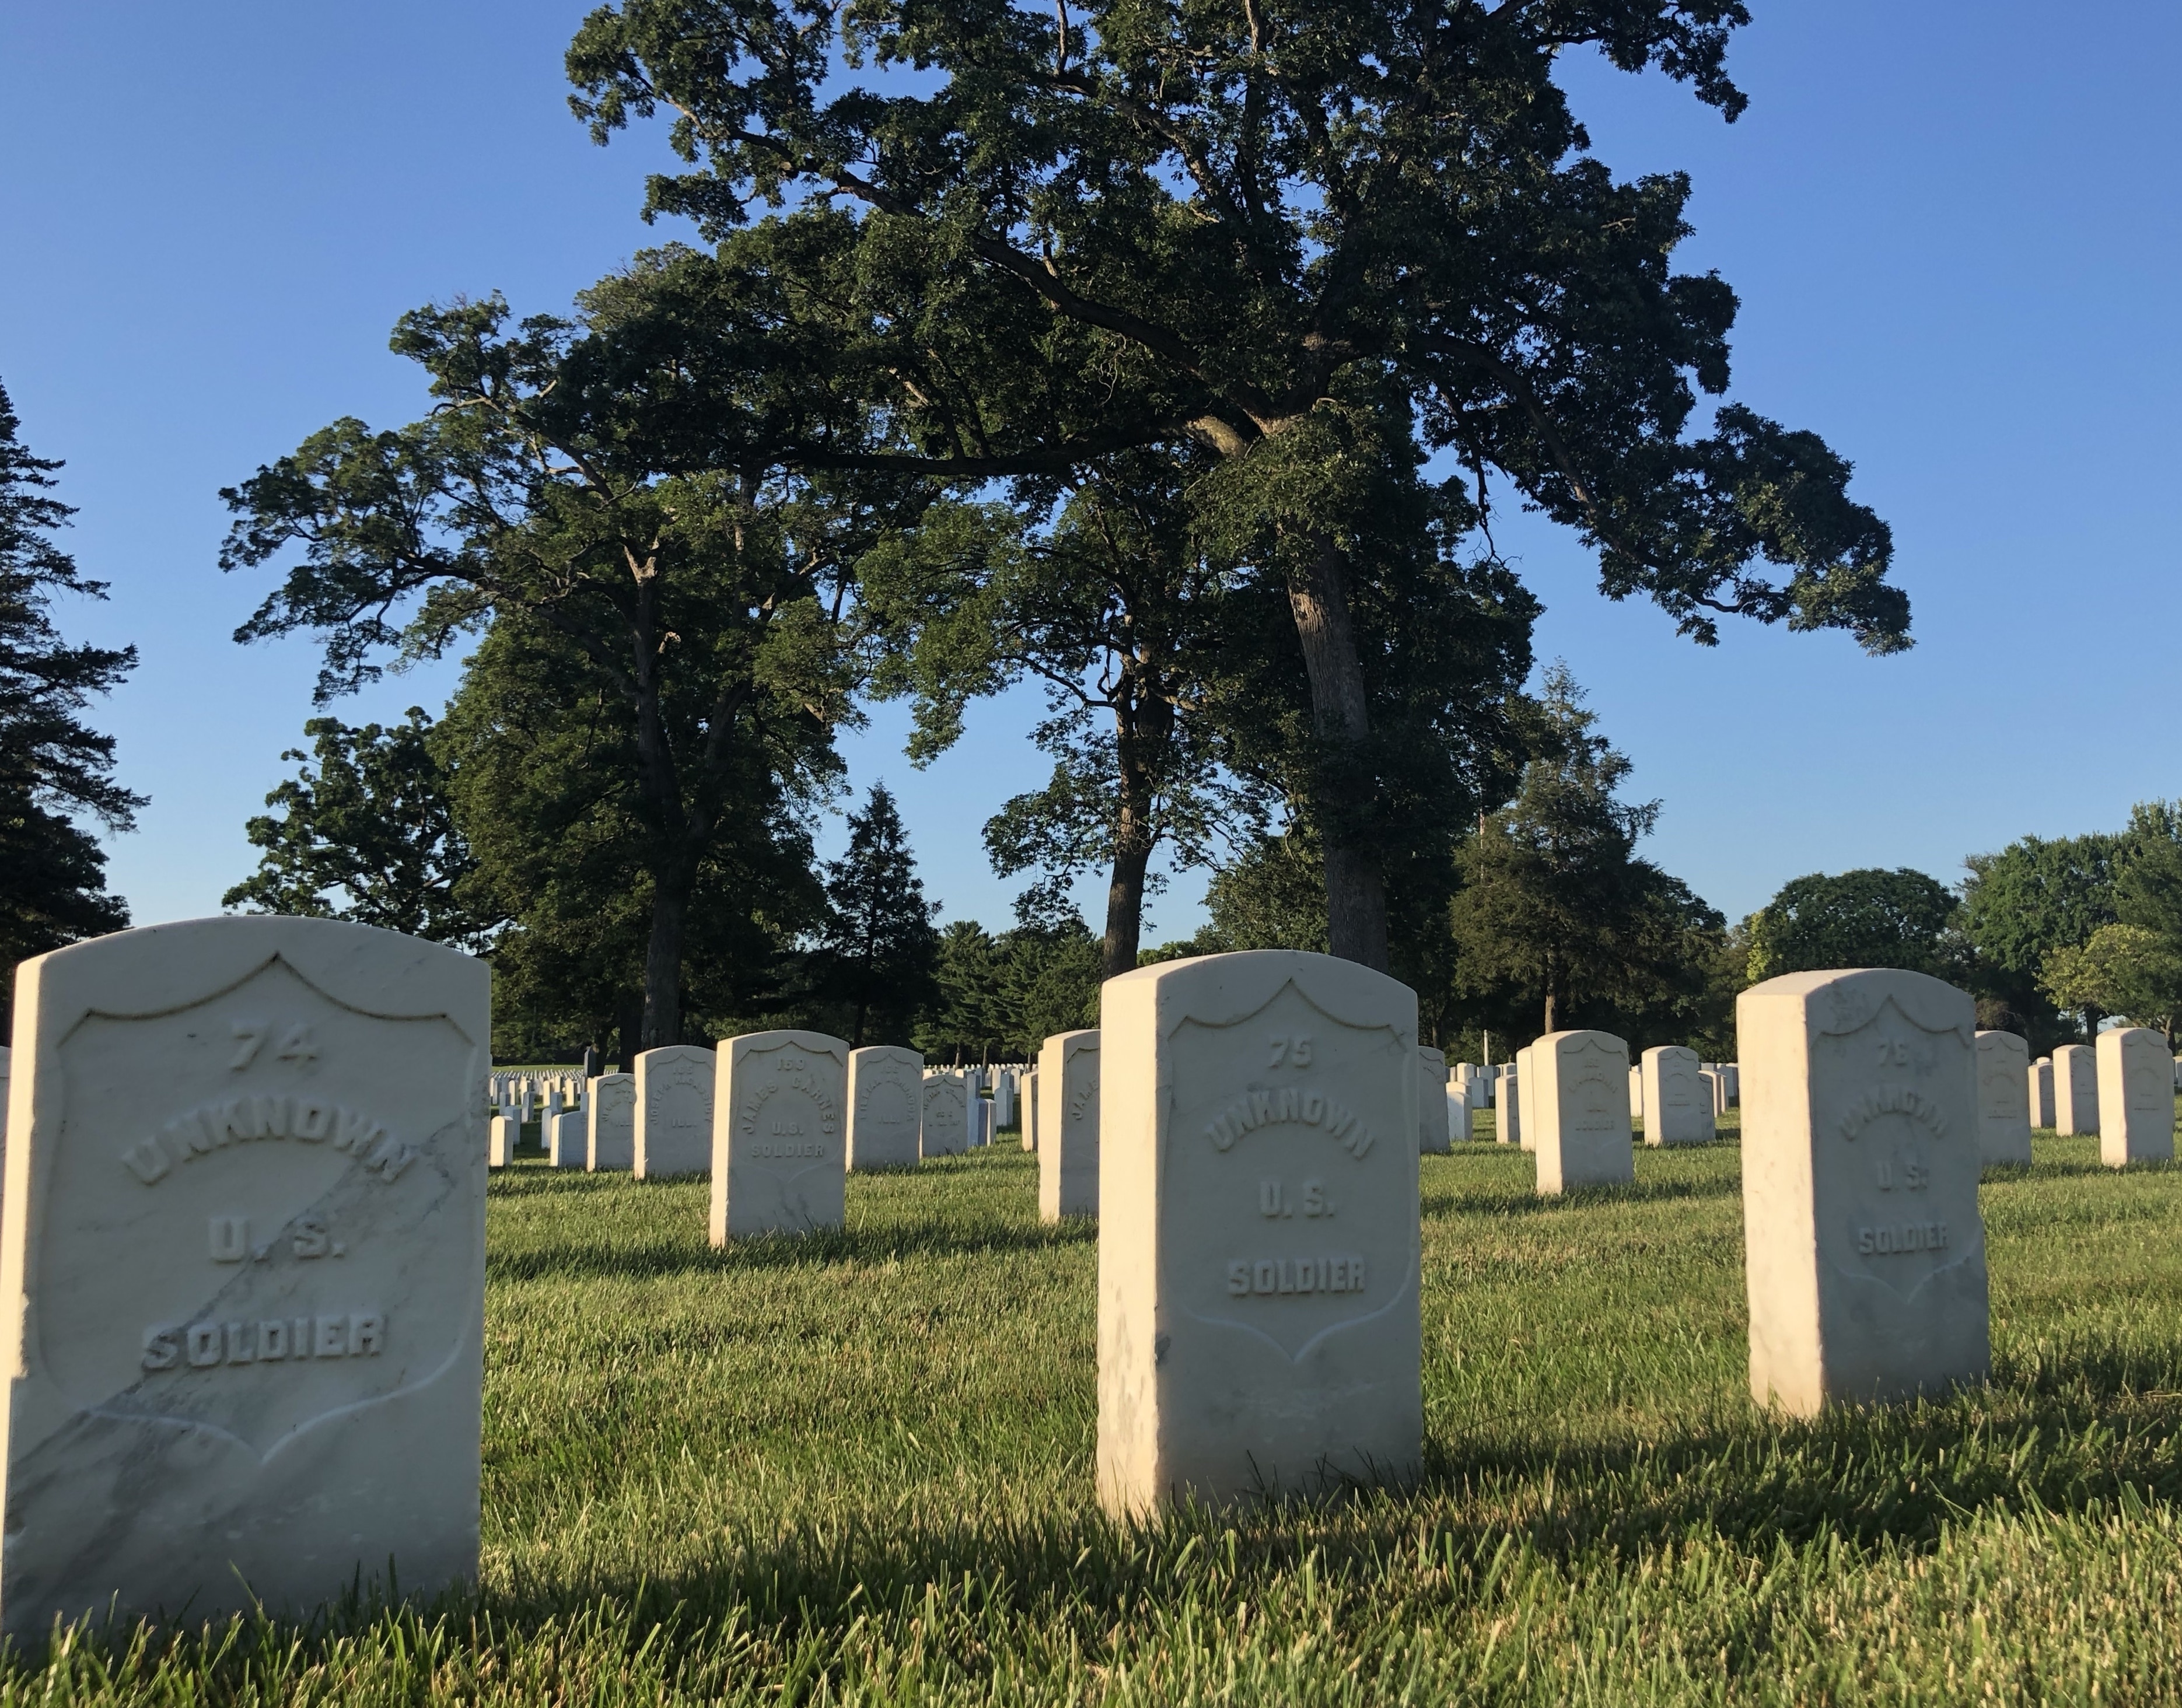 The grounds of this National Cemetery contain the remains of almost 800 Union soldiers, a large majority of them unknown by name.  During the Civil War this was a large hospital which stayed open until 1866 to treat the wounded from the Civil War. 